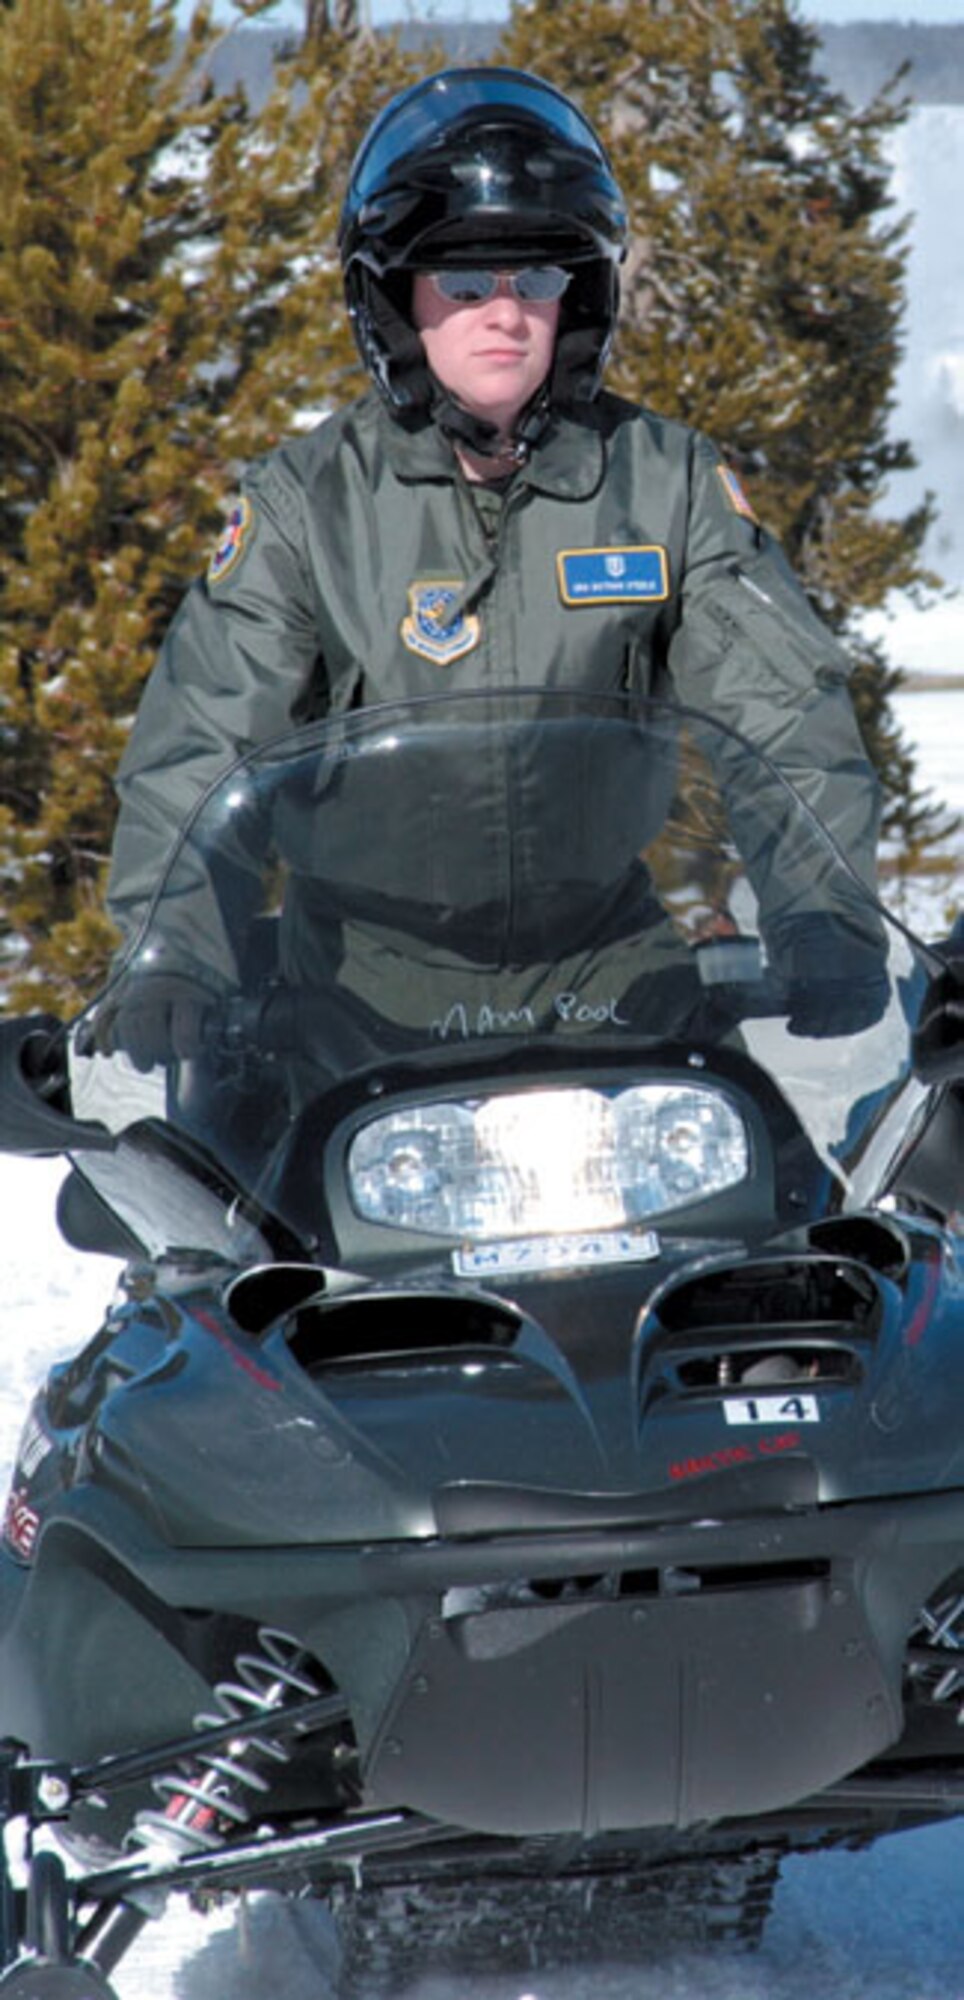 YELLOWSTONE NATIONAL PARK -- Steele rides a snowmobile near Old Faithful during a medical exercise here called Winterops 2003.  During Yellowstone's harsh winter season, snowmobiles are the quickest way for emergency medical technicians to get around the park.  (U.S. Air Force photo by Bo Joyner)